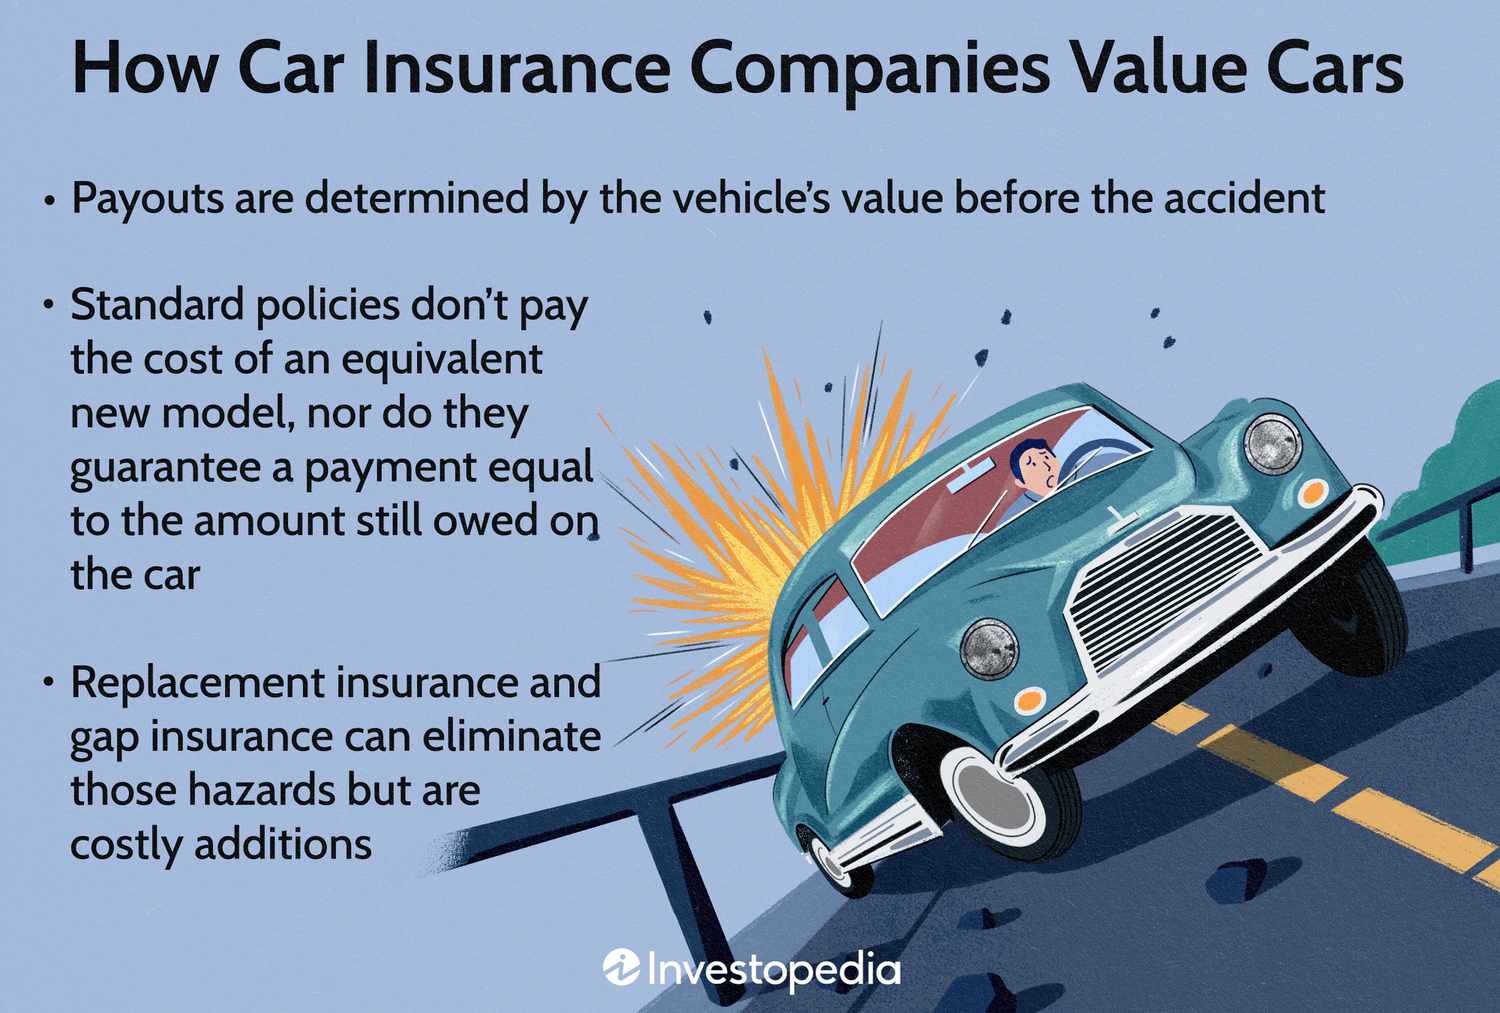 Get Car Insurance Quotes Online